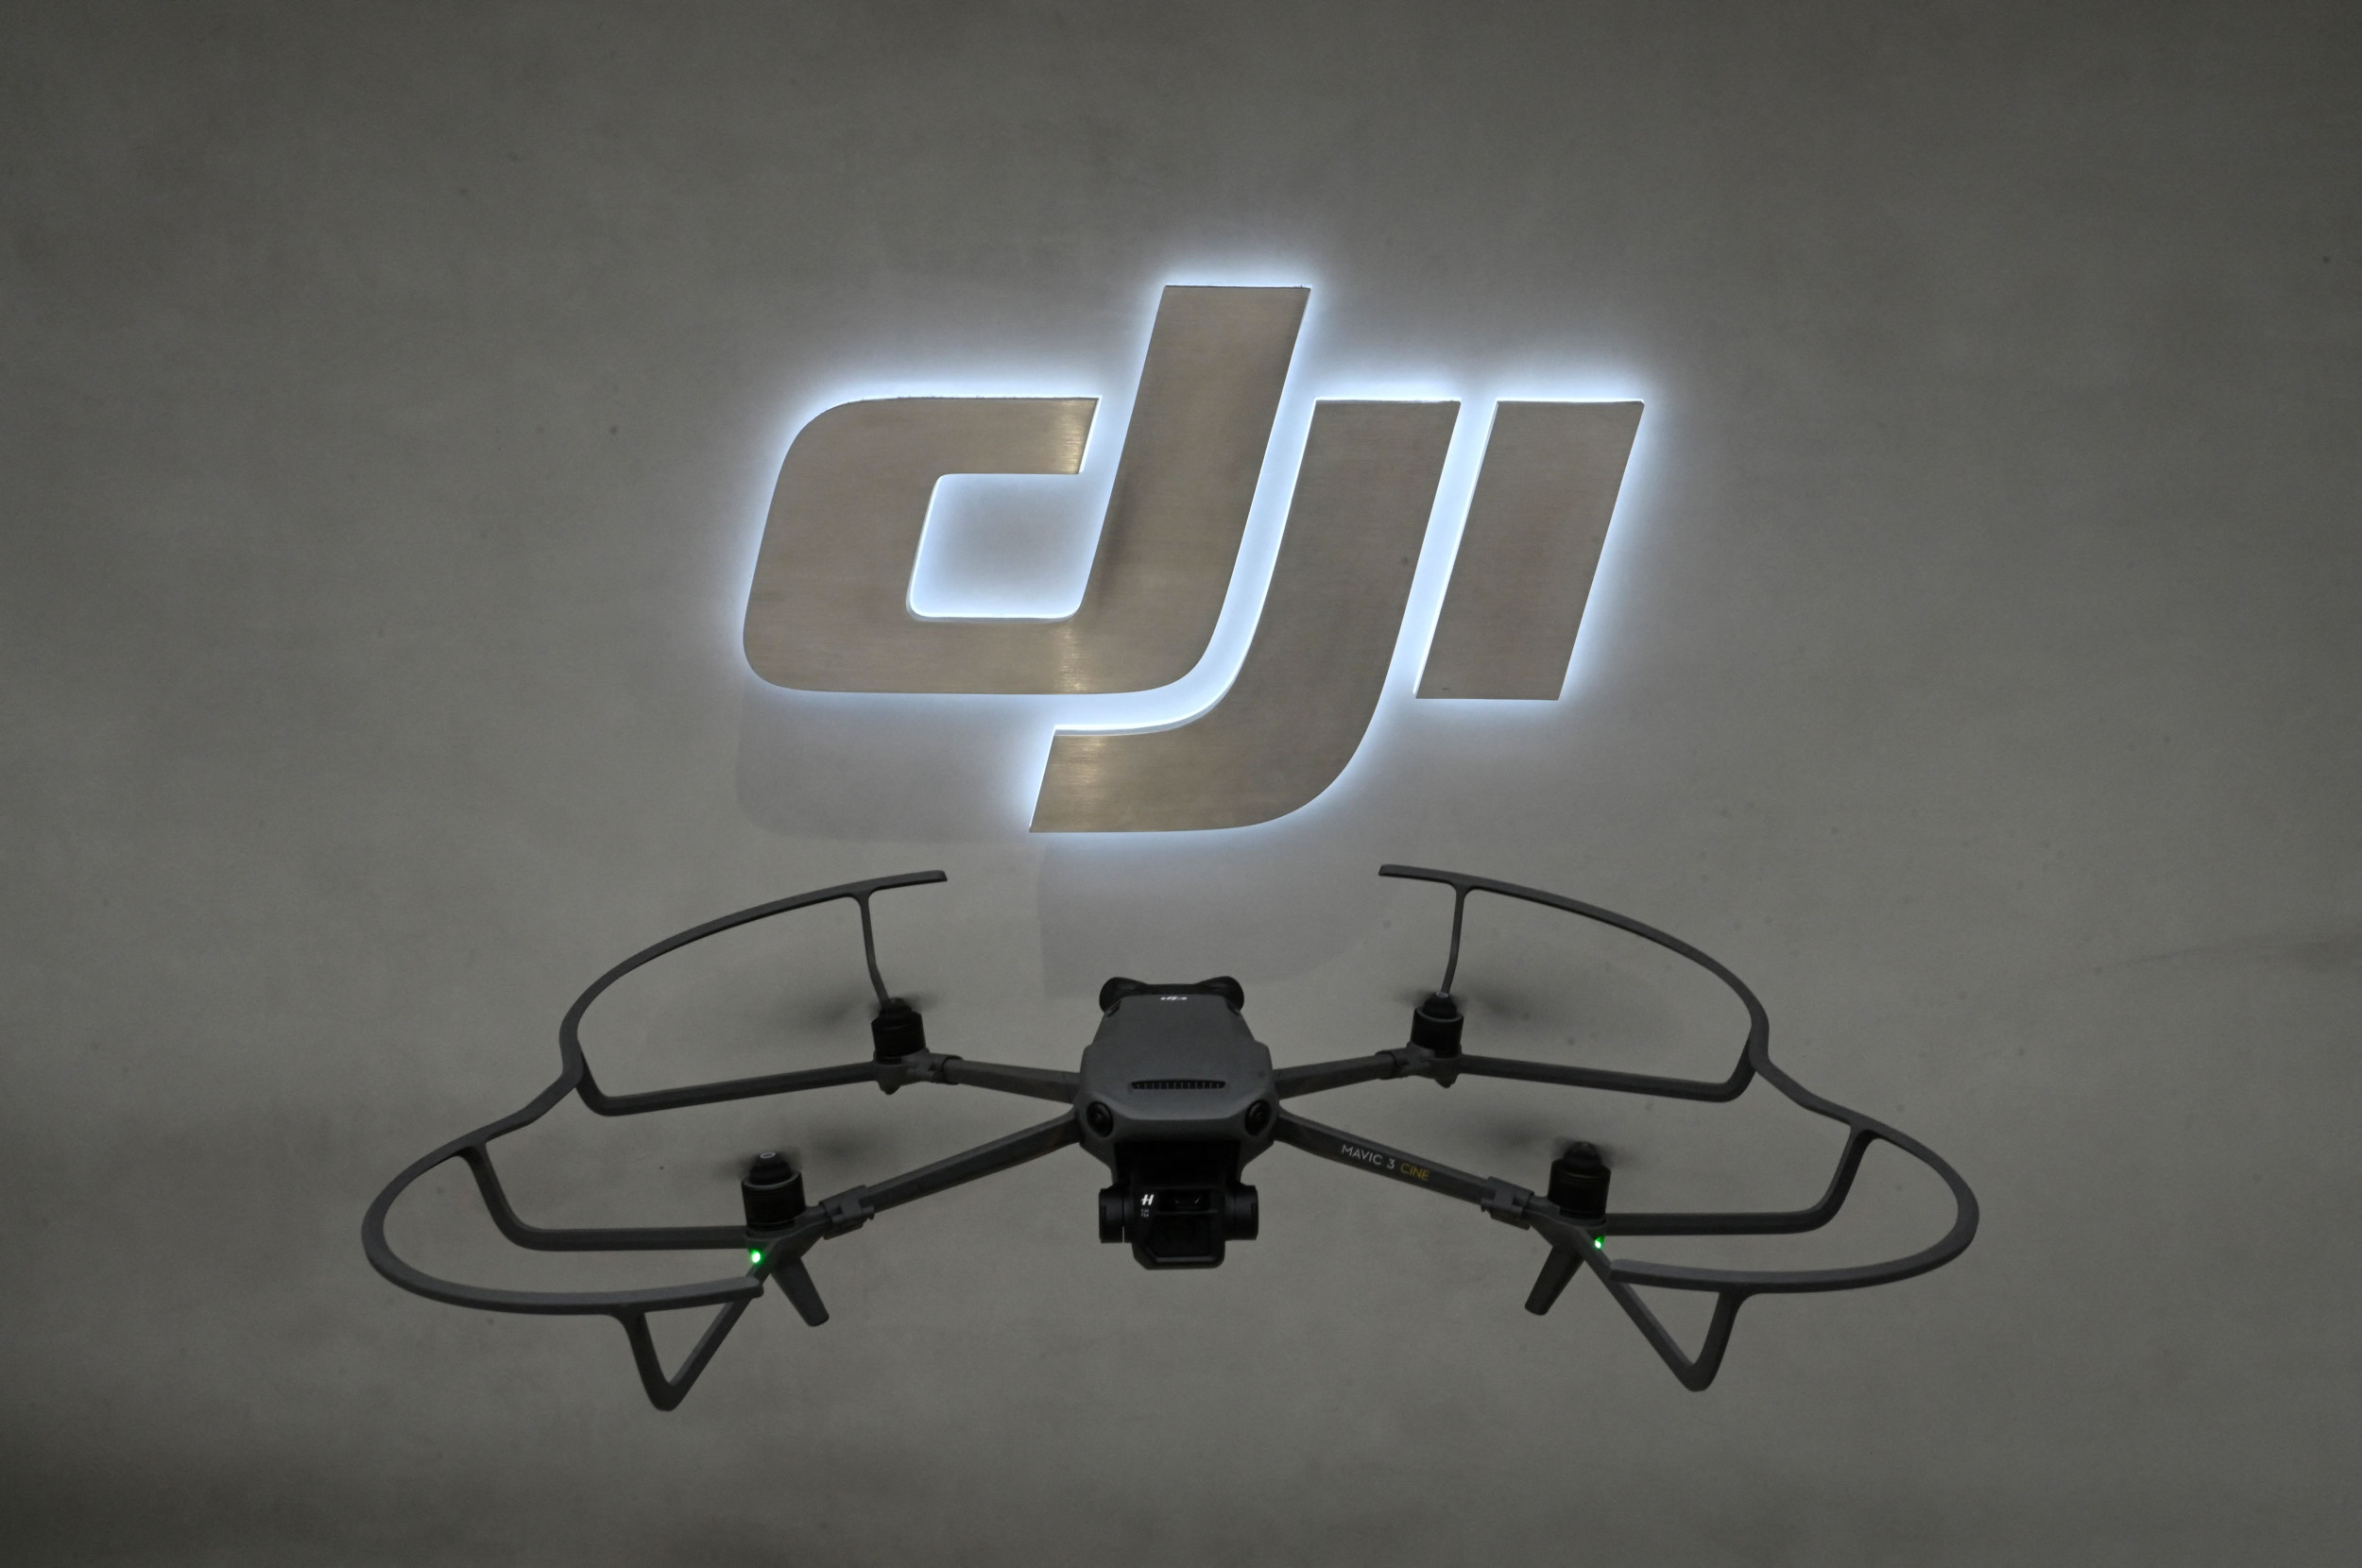 Chinese drone company DJI received funding from Chinese government  investors, despite prior claims - The Washington Post